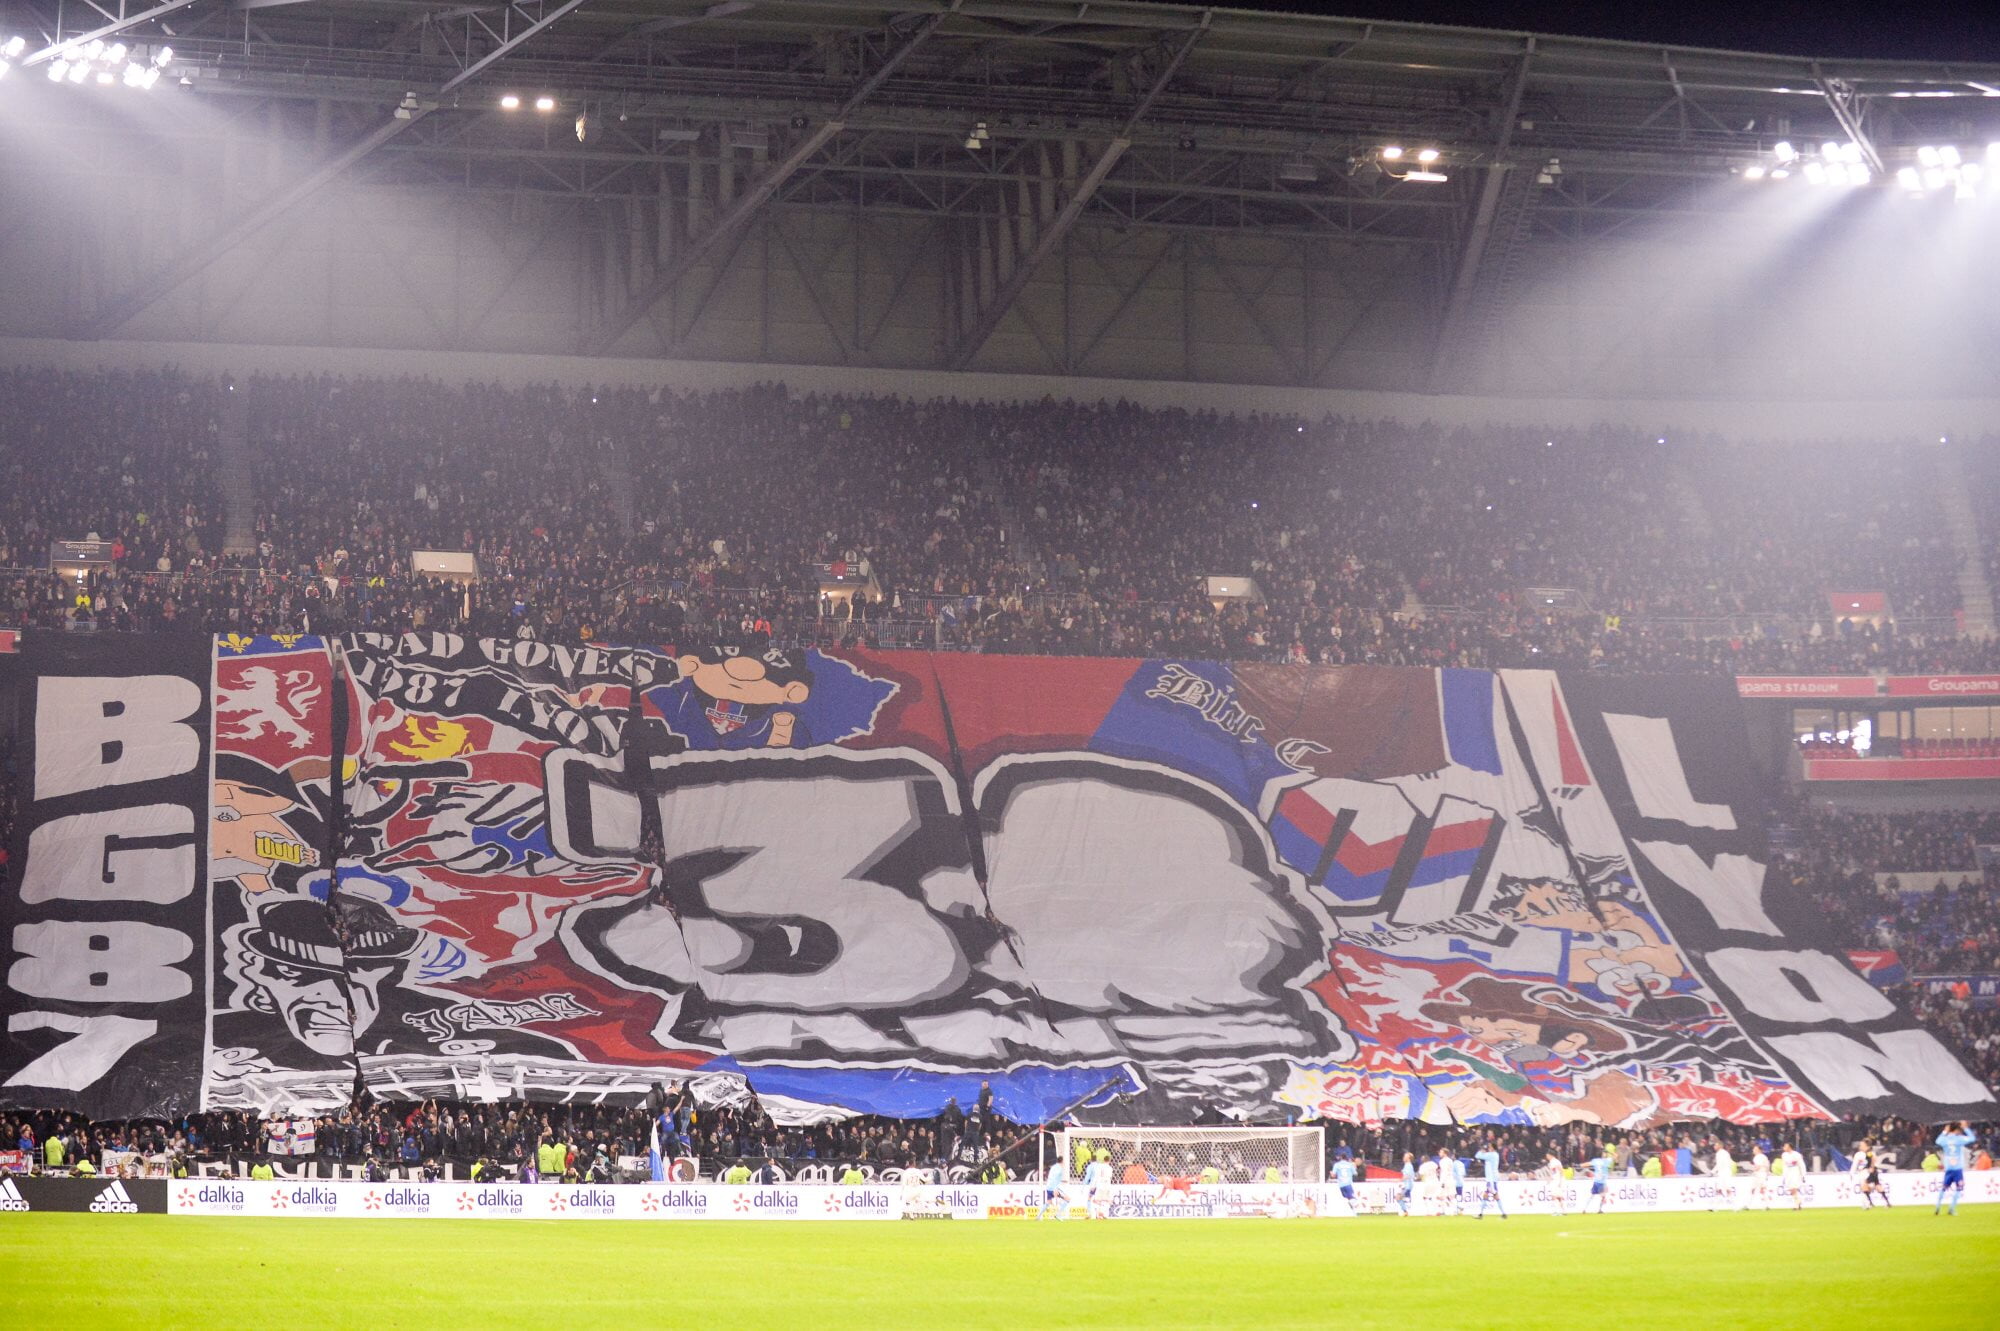 OL supporters group Bad Gones celebrates 30 years